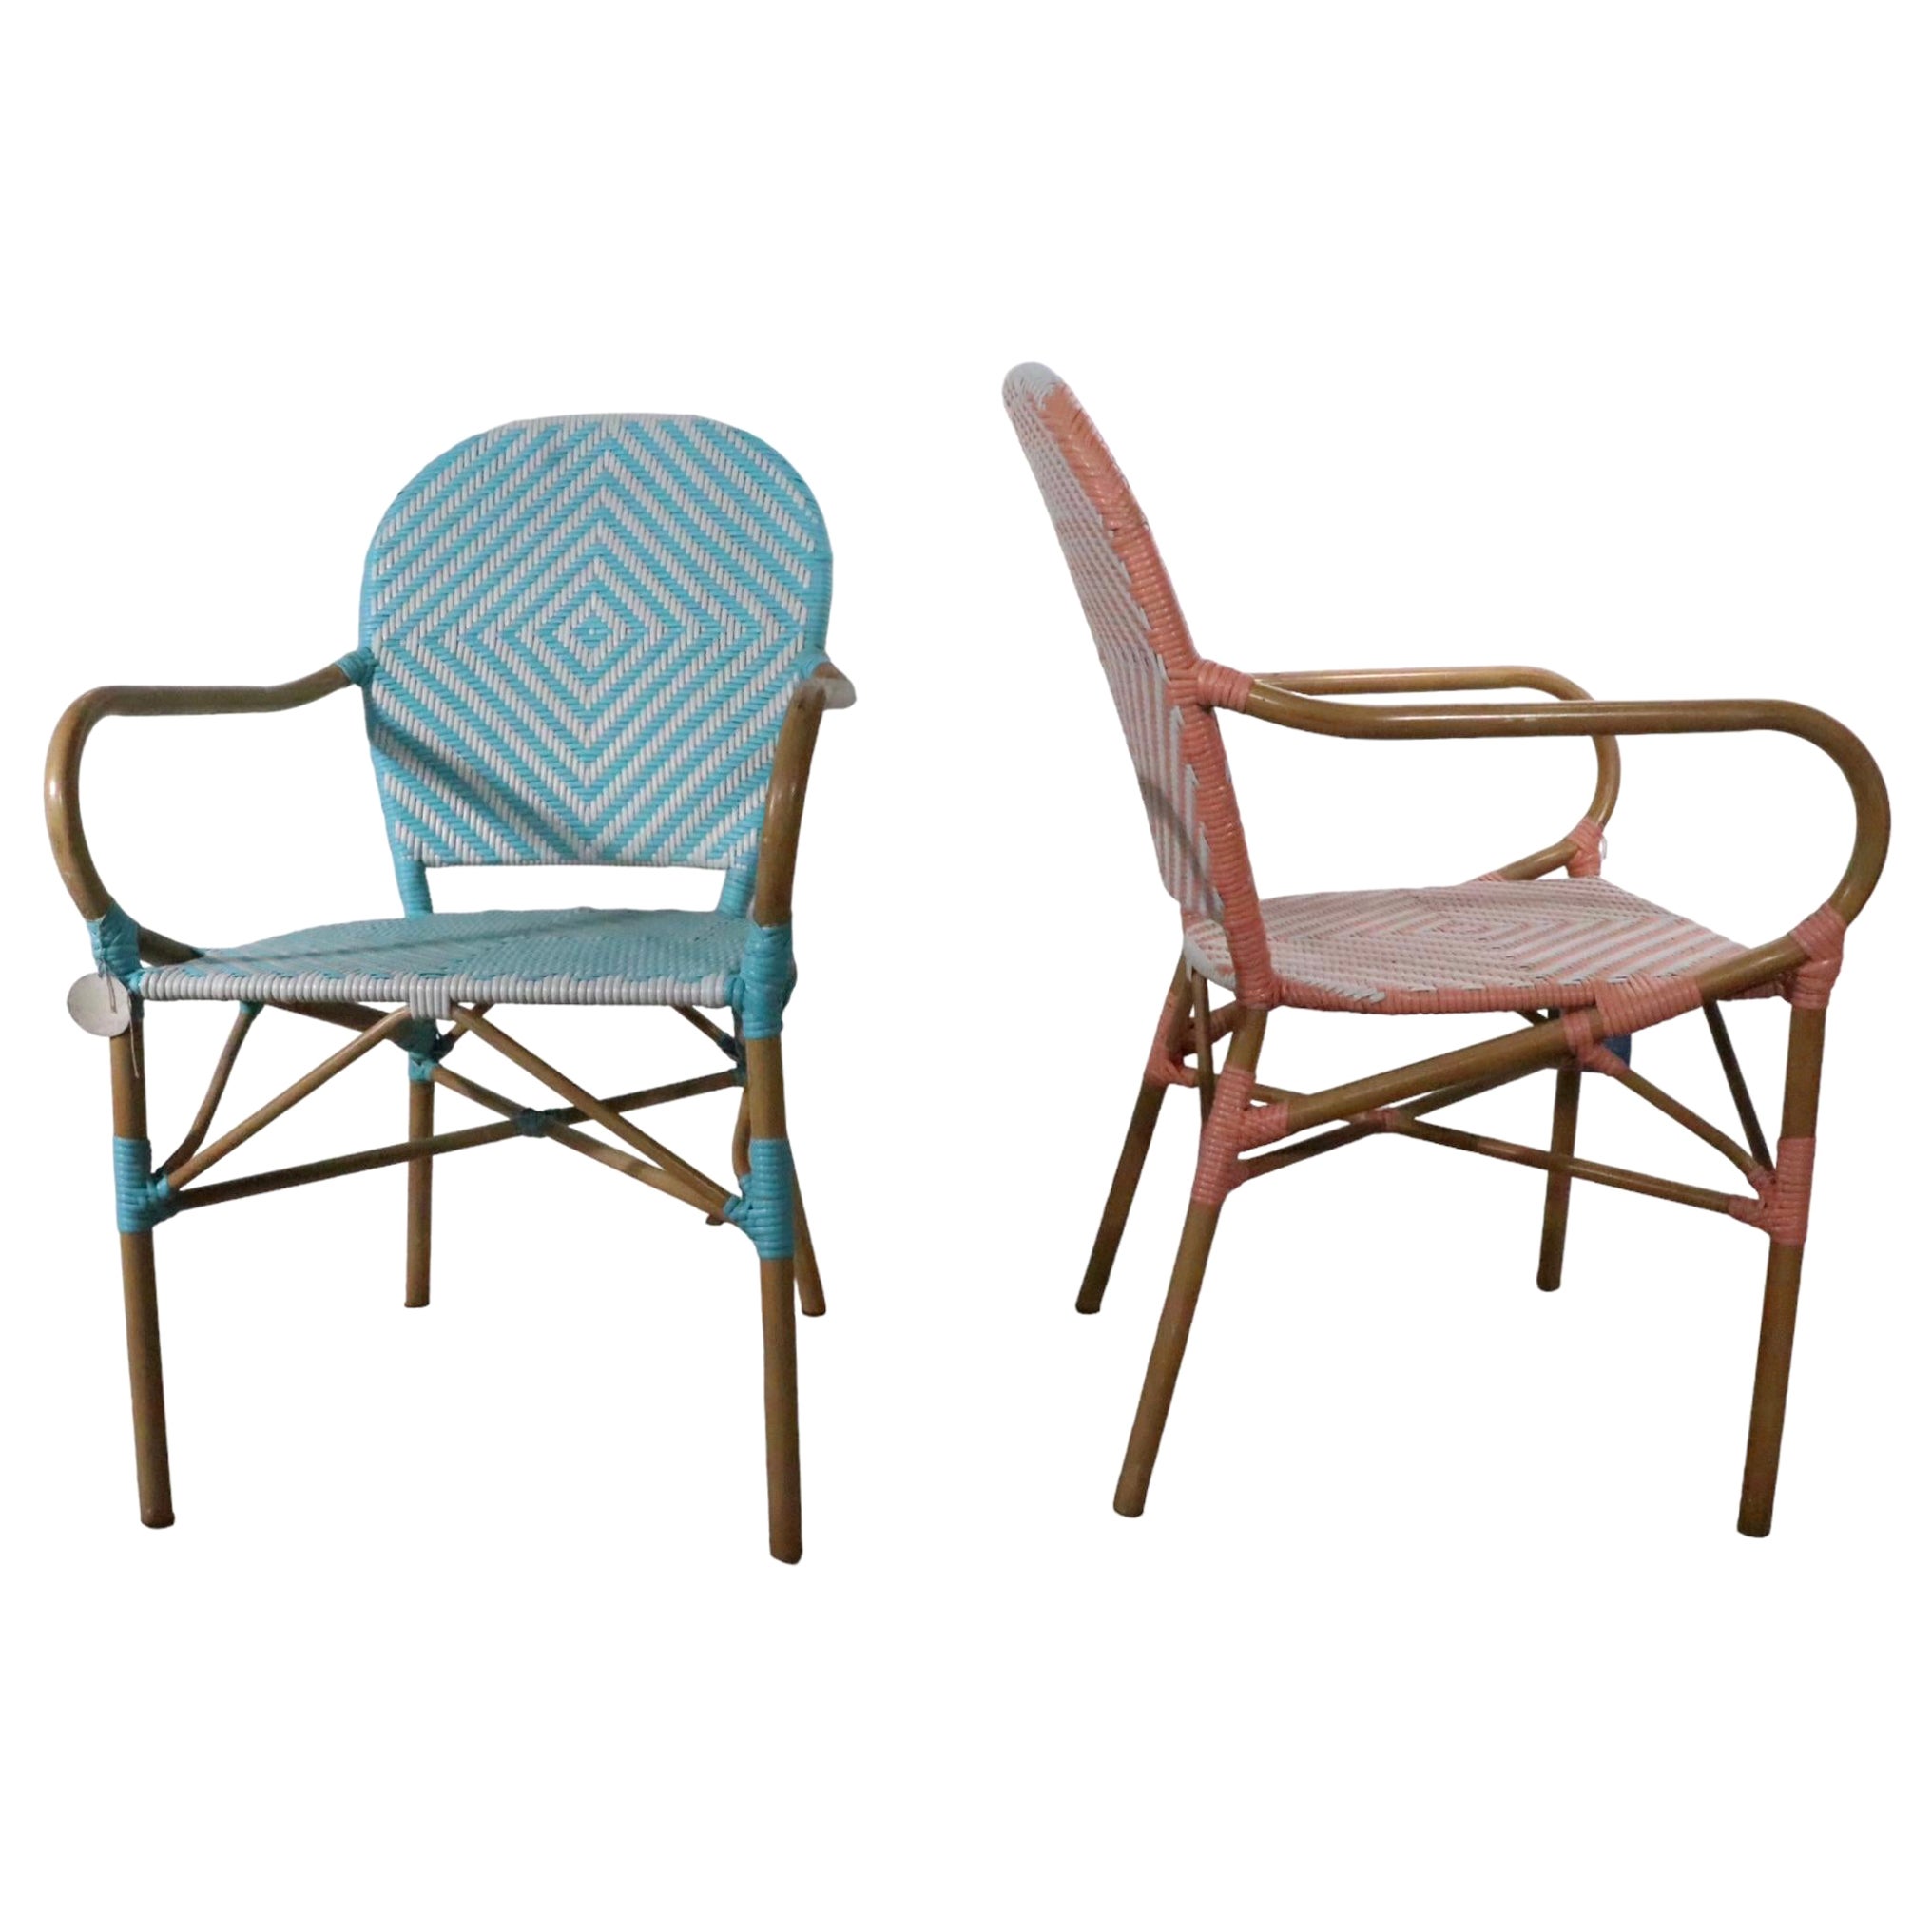 Pr. French Bistro Cafe Style Chairs For Sale